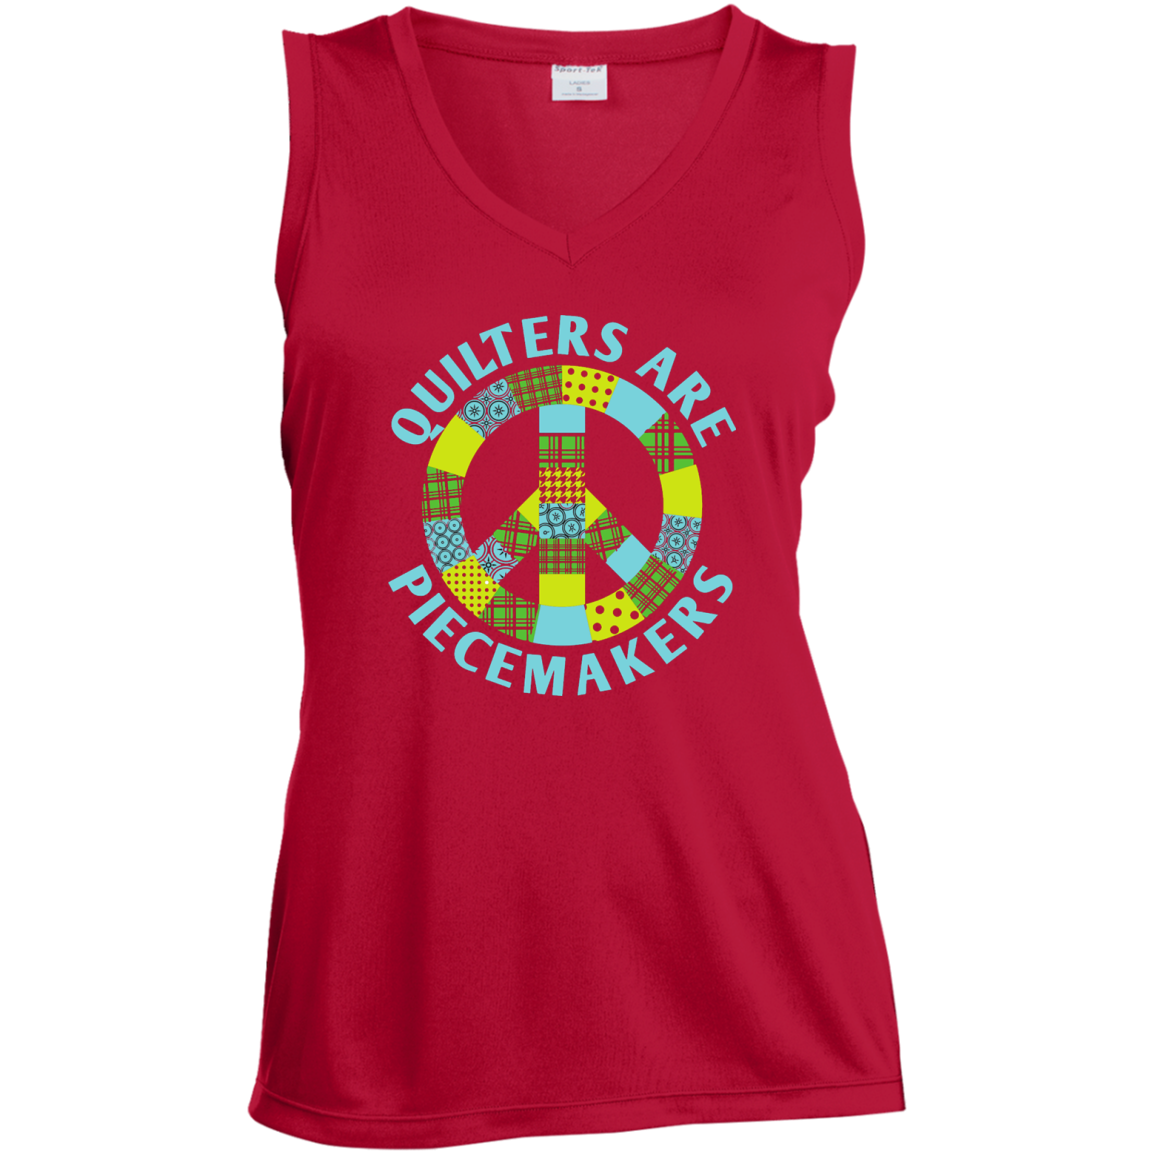 Quilters are Piecemakers Ladies Sleeveless V-Neck - Crafter4Life - 4